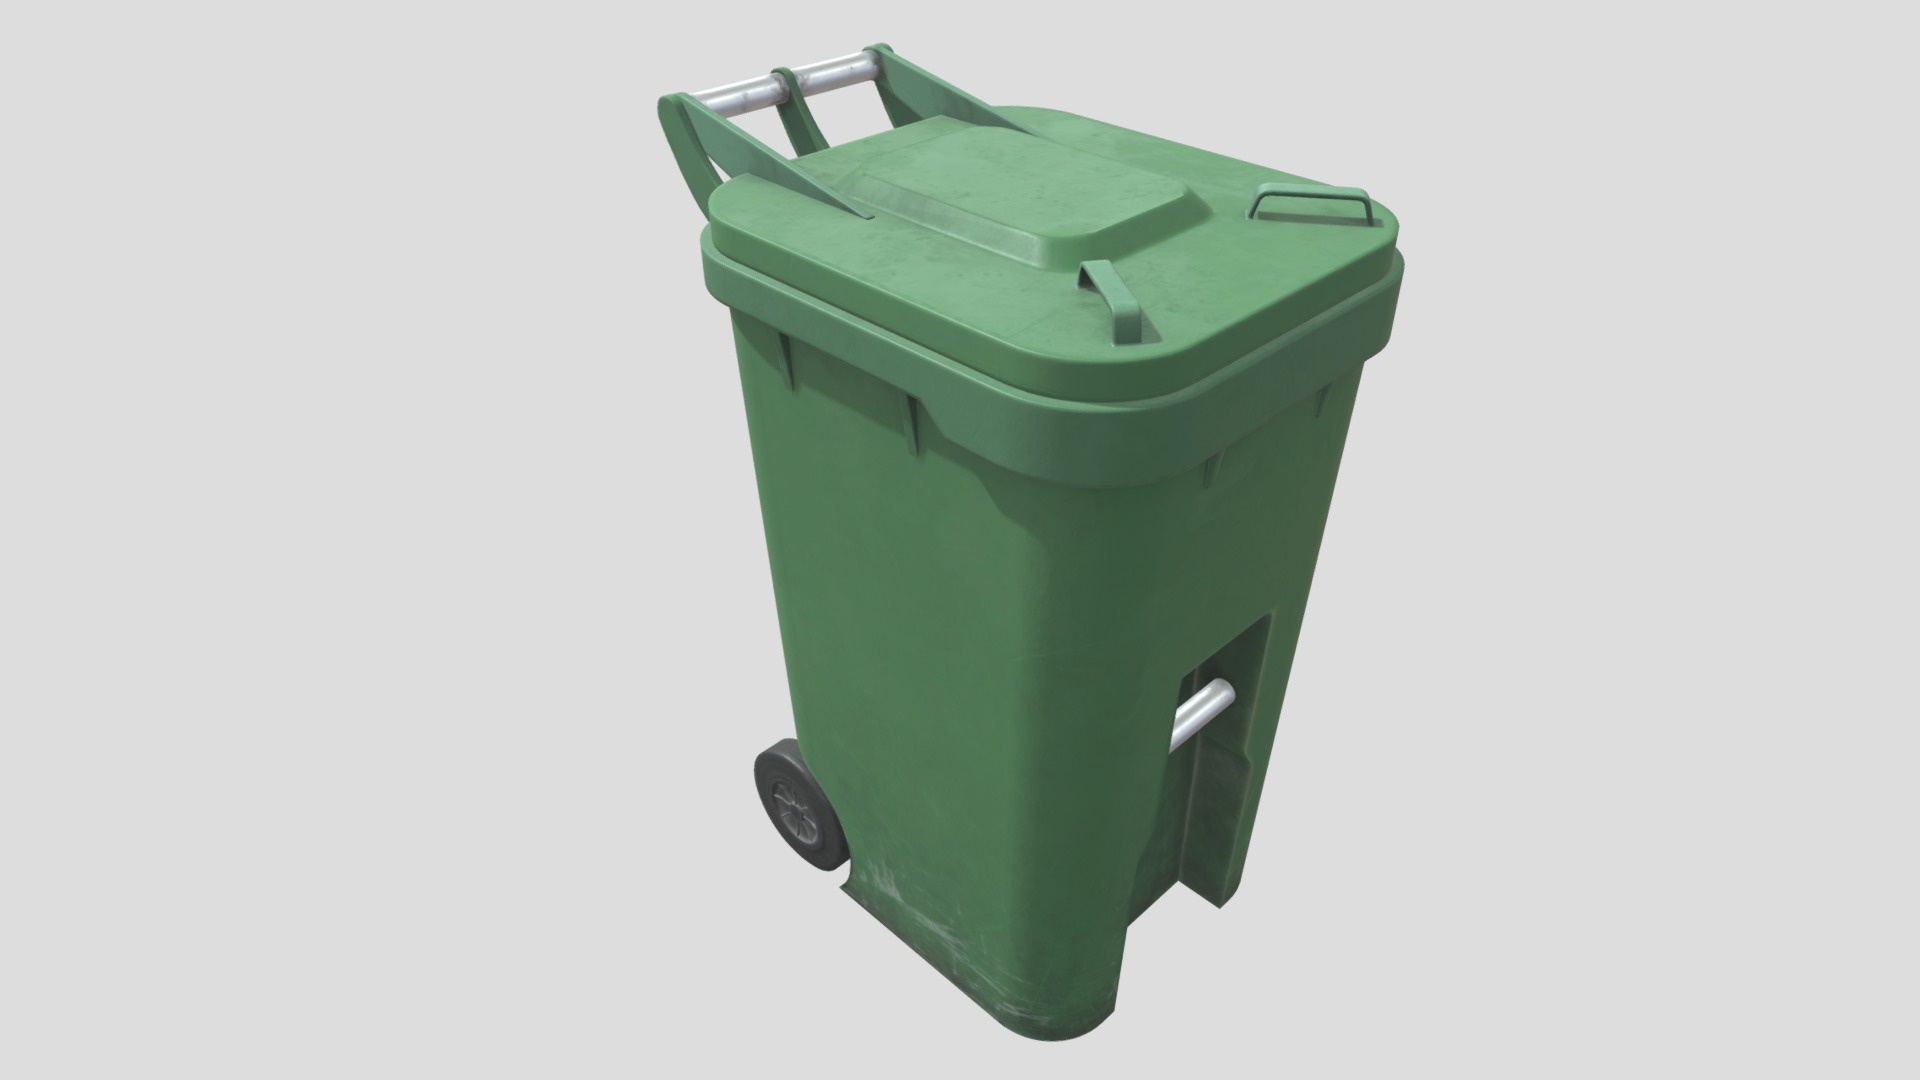 3D model Plastic Trash Bin - This is a 3D model of the Plastic Trash Bin. The 3D model is about a green and black garbage can.